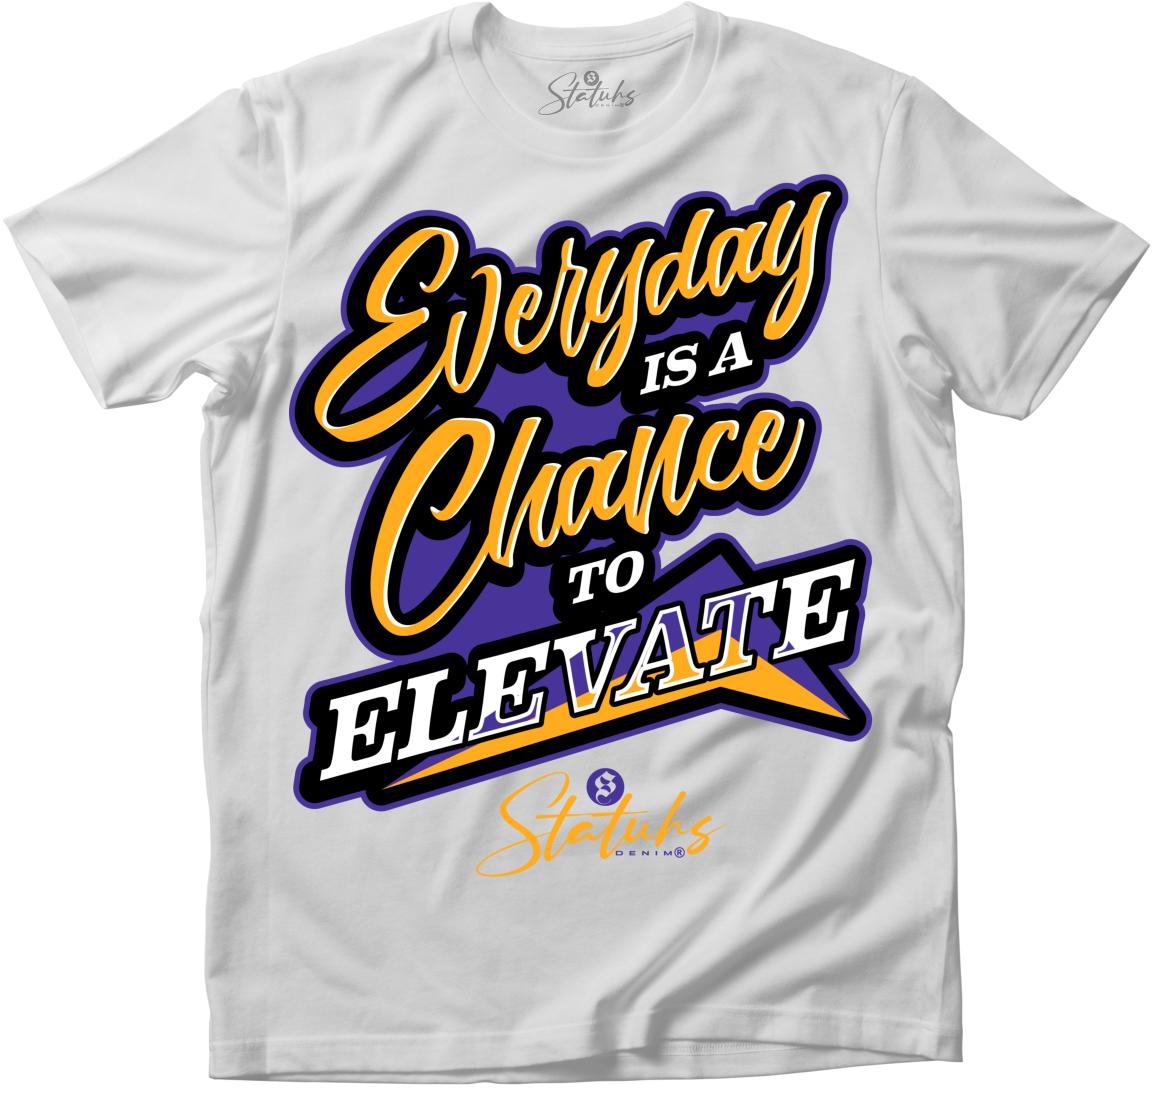 EVERYDAY IS A CHANCE TO ELEVATE